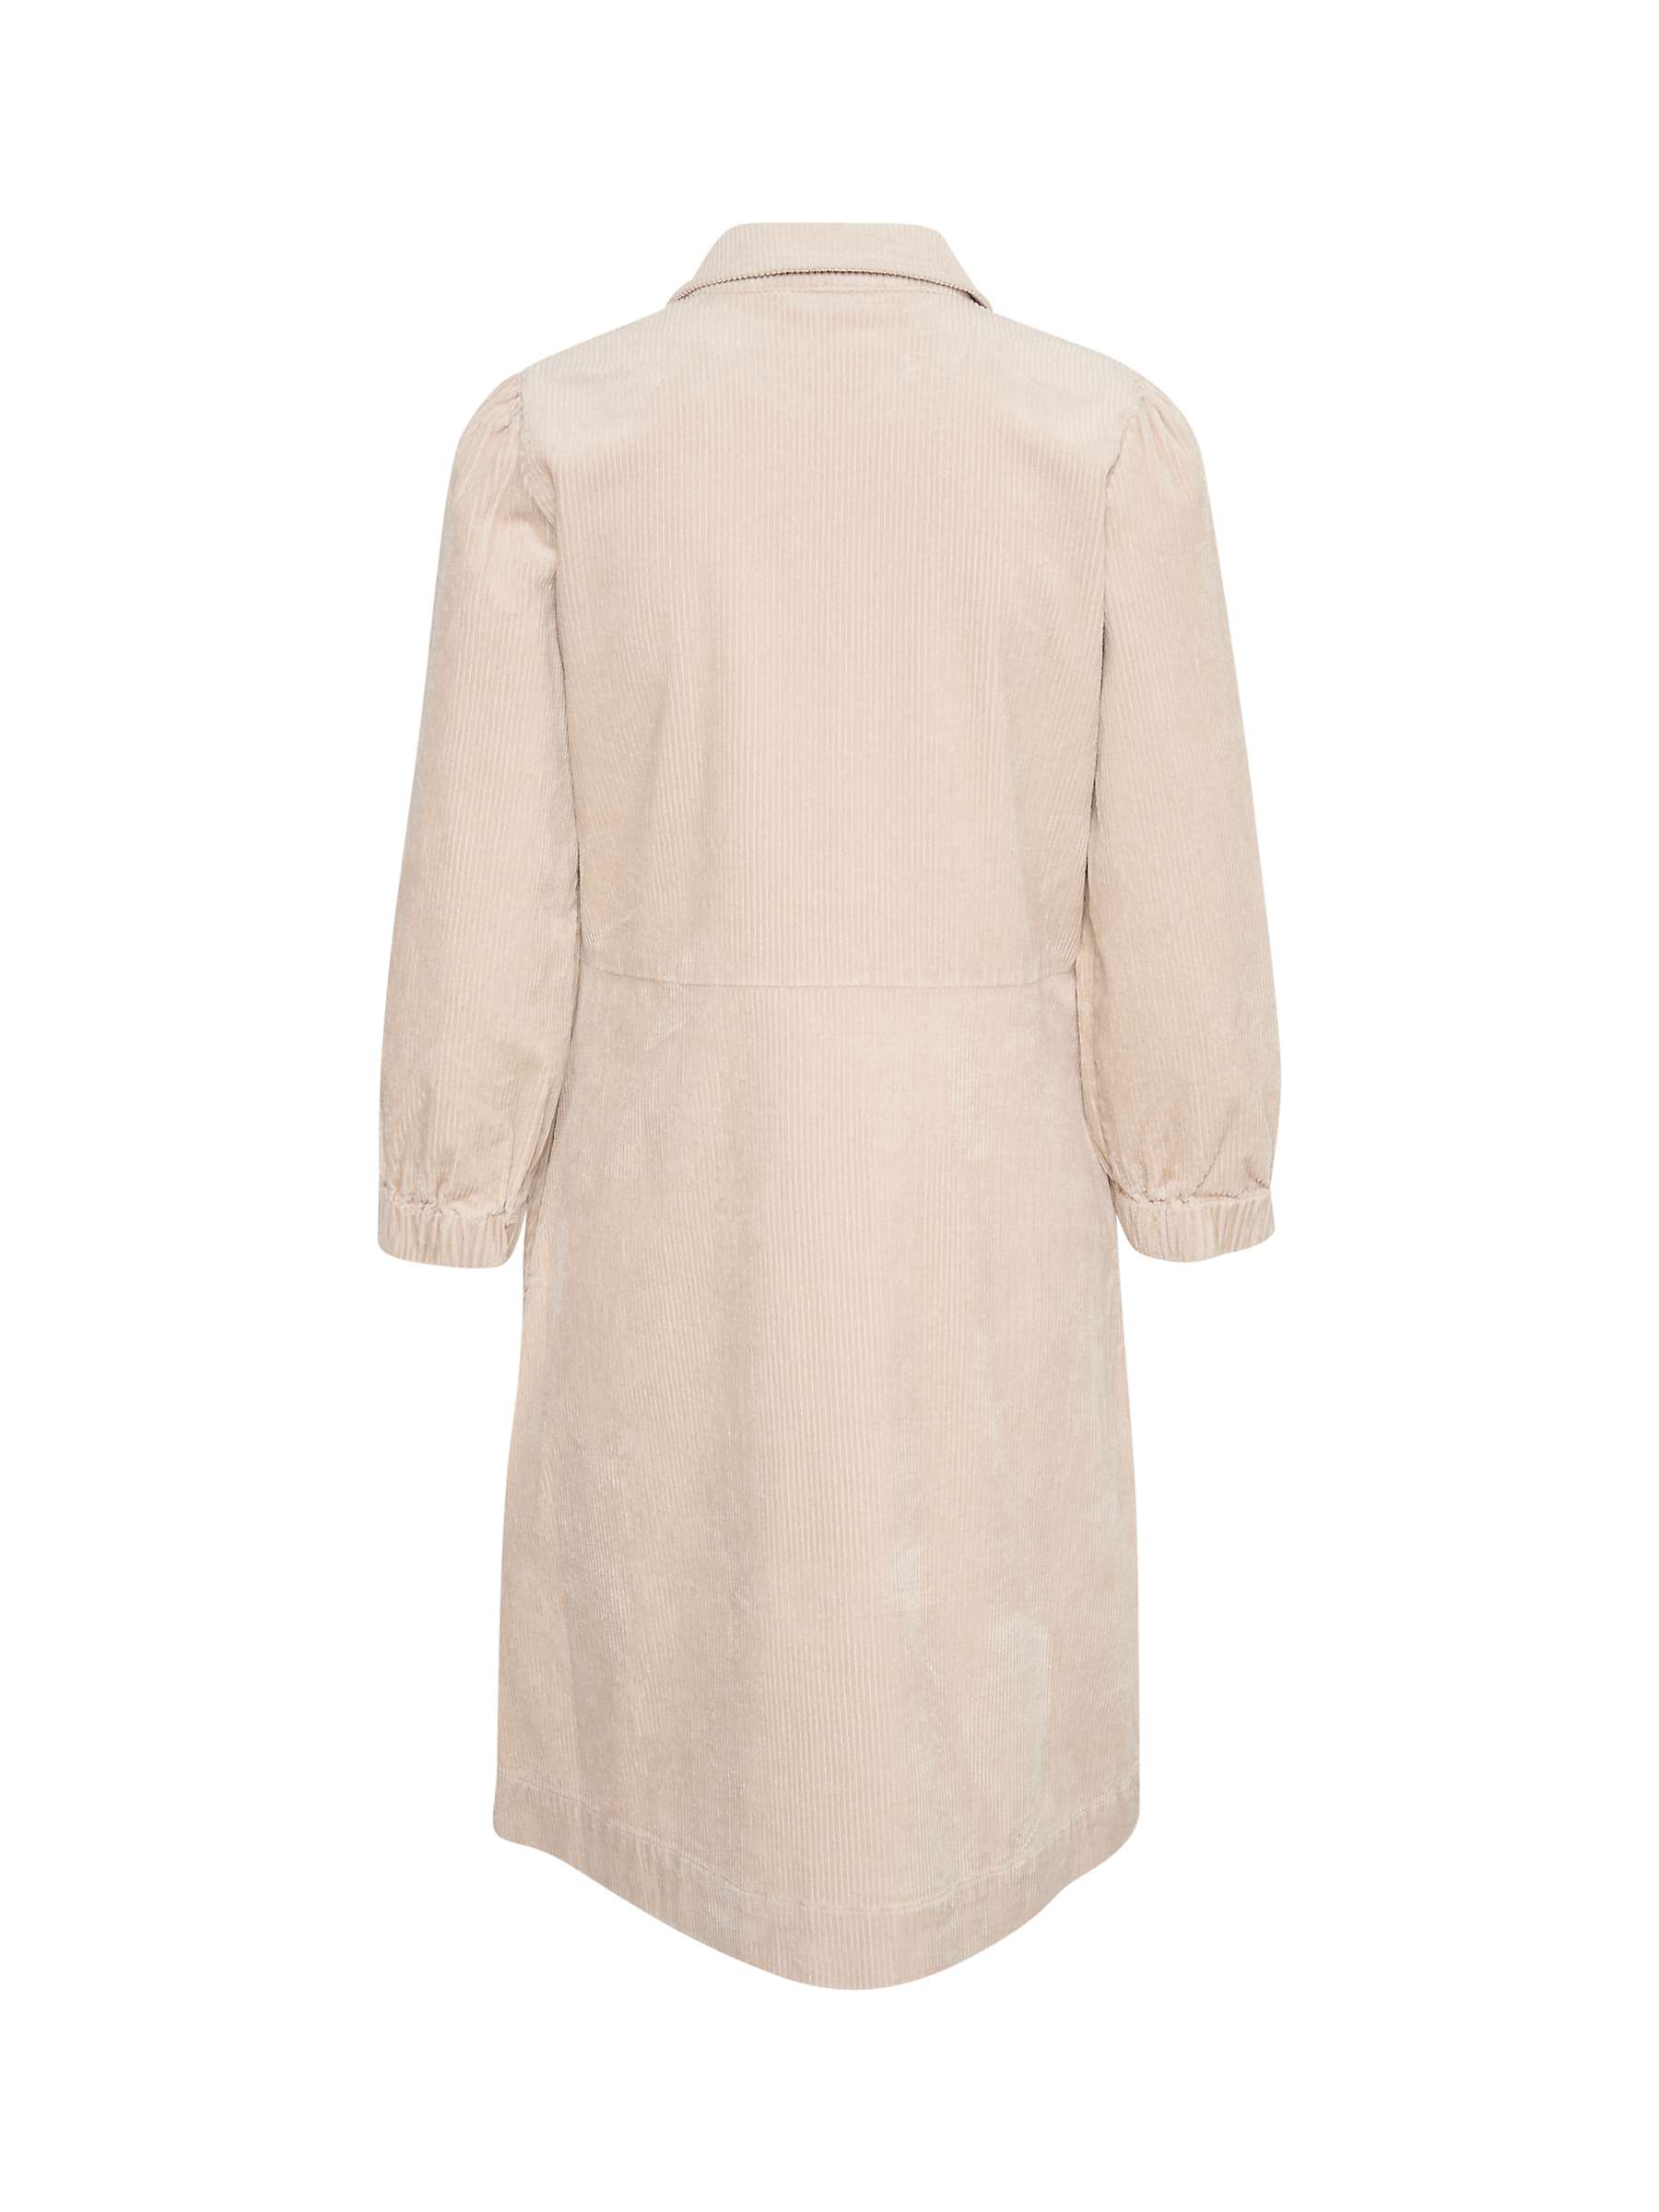 Buy Part Two Eyvors Relaxed Fit Corduroy Dress Online at johnlewis.com